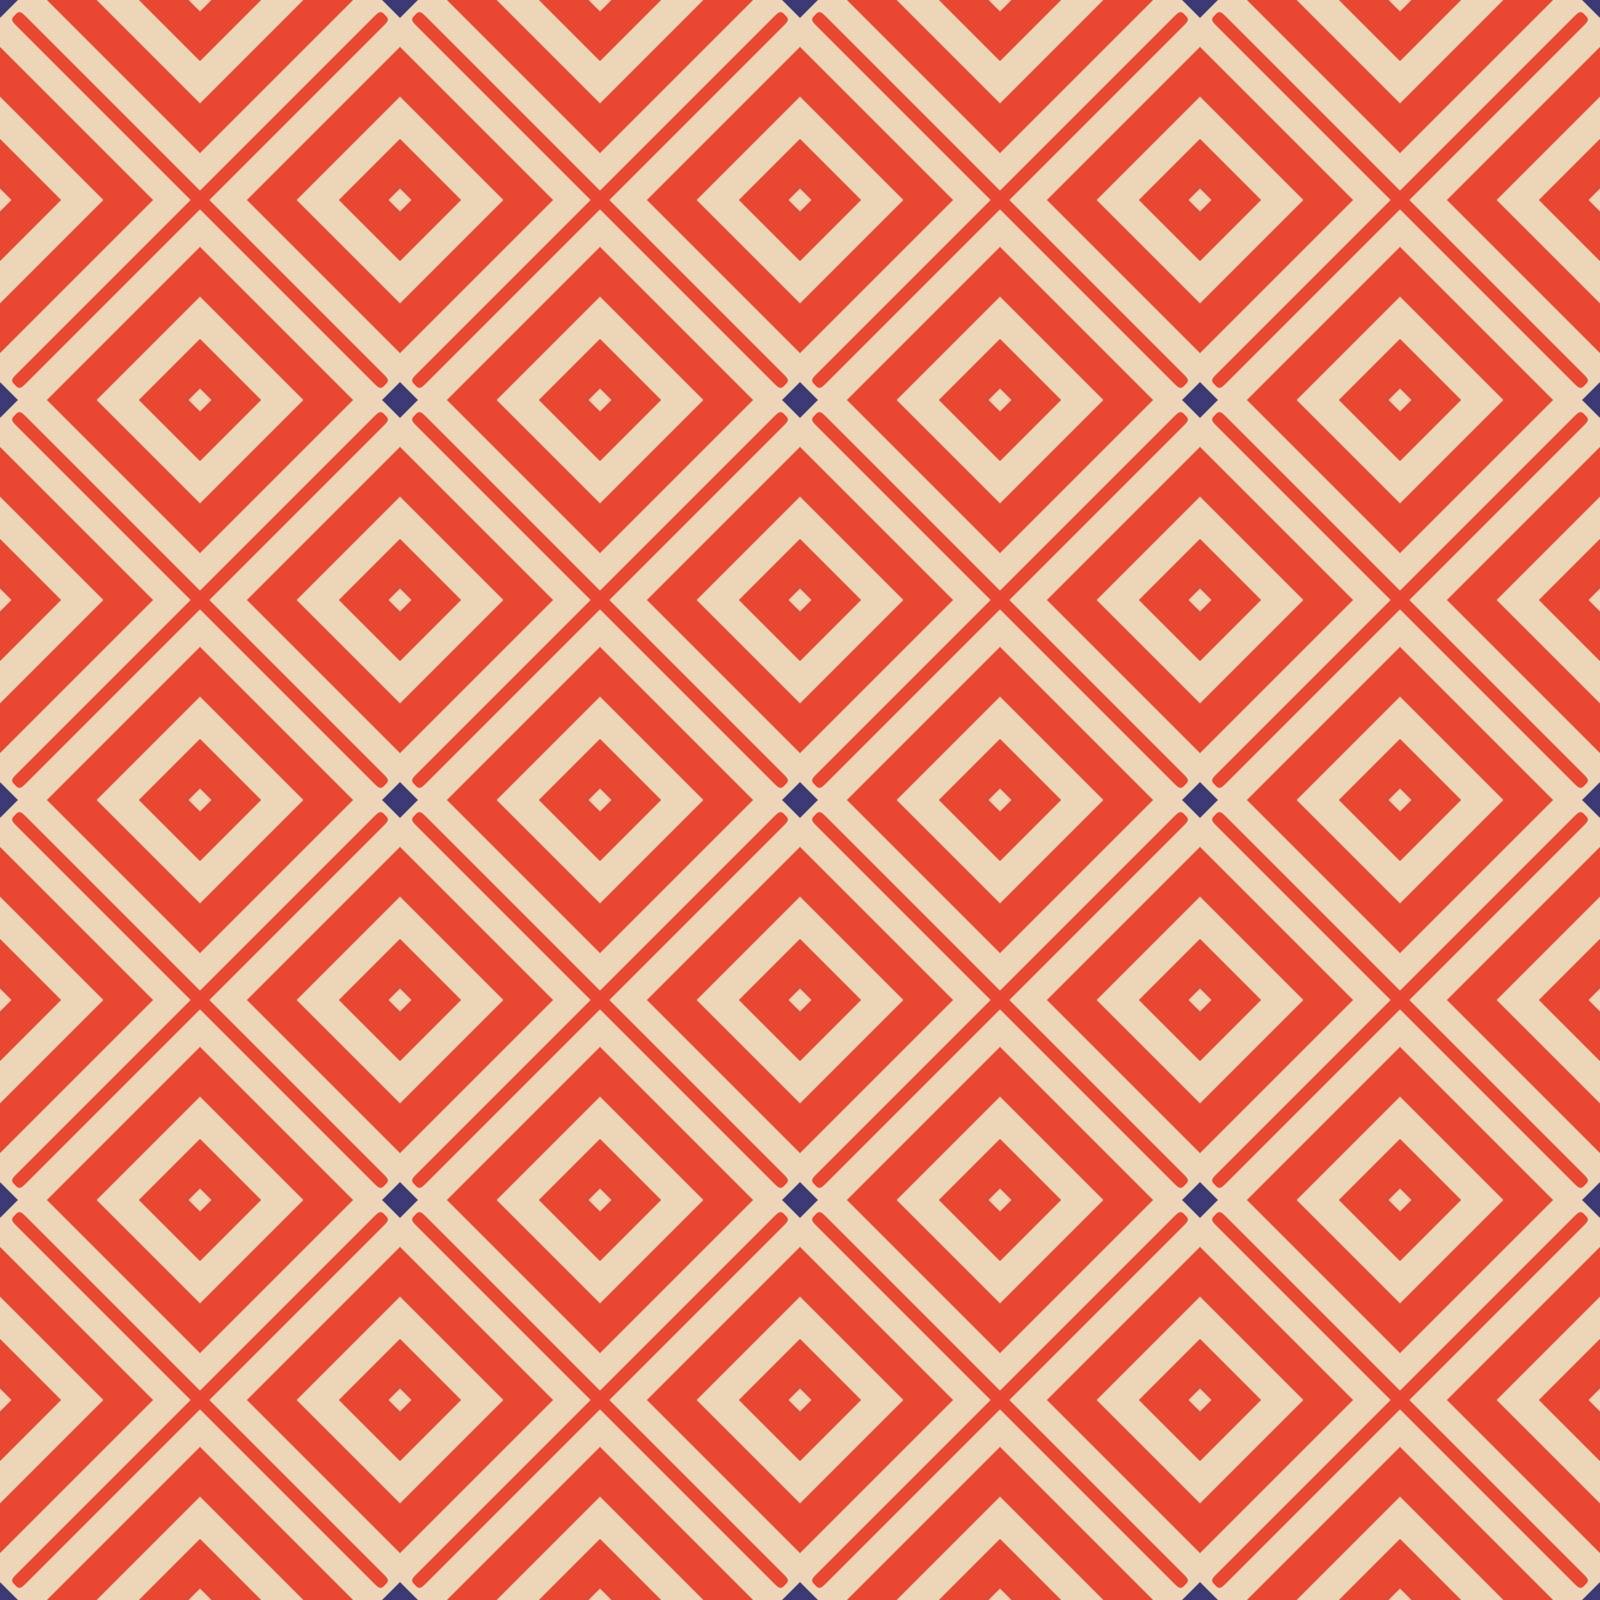 Seamless illustrated pattern made of abstract elements in beige, red and blue